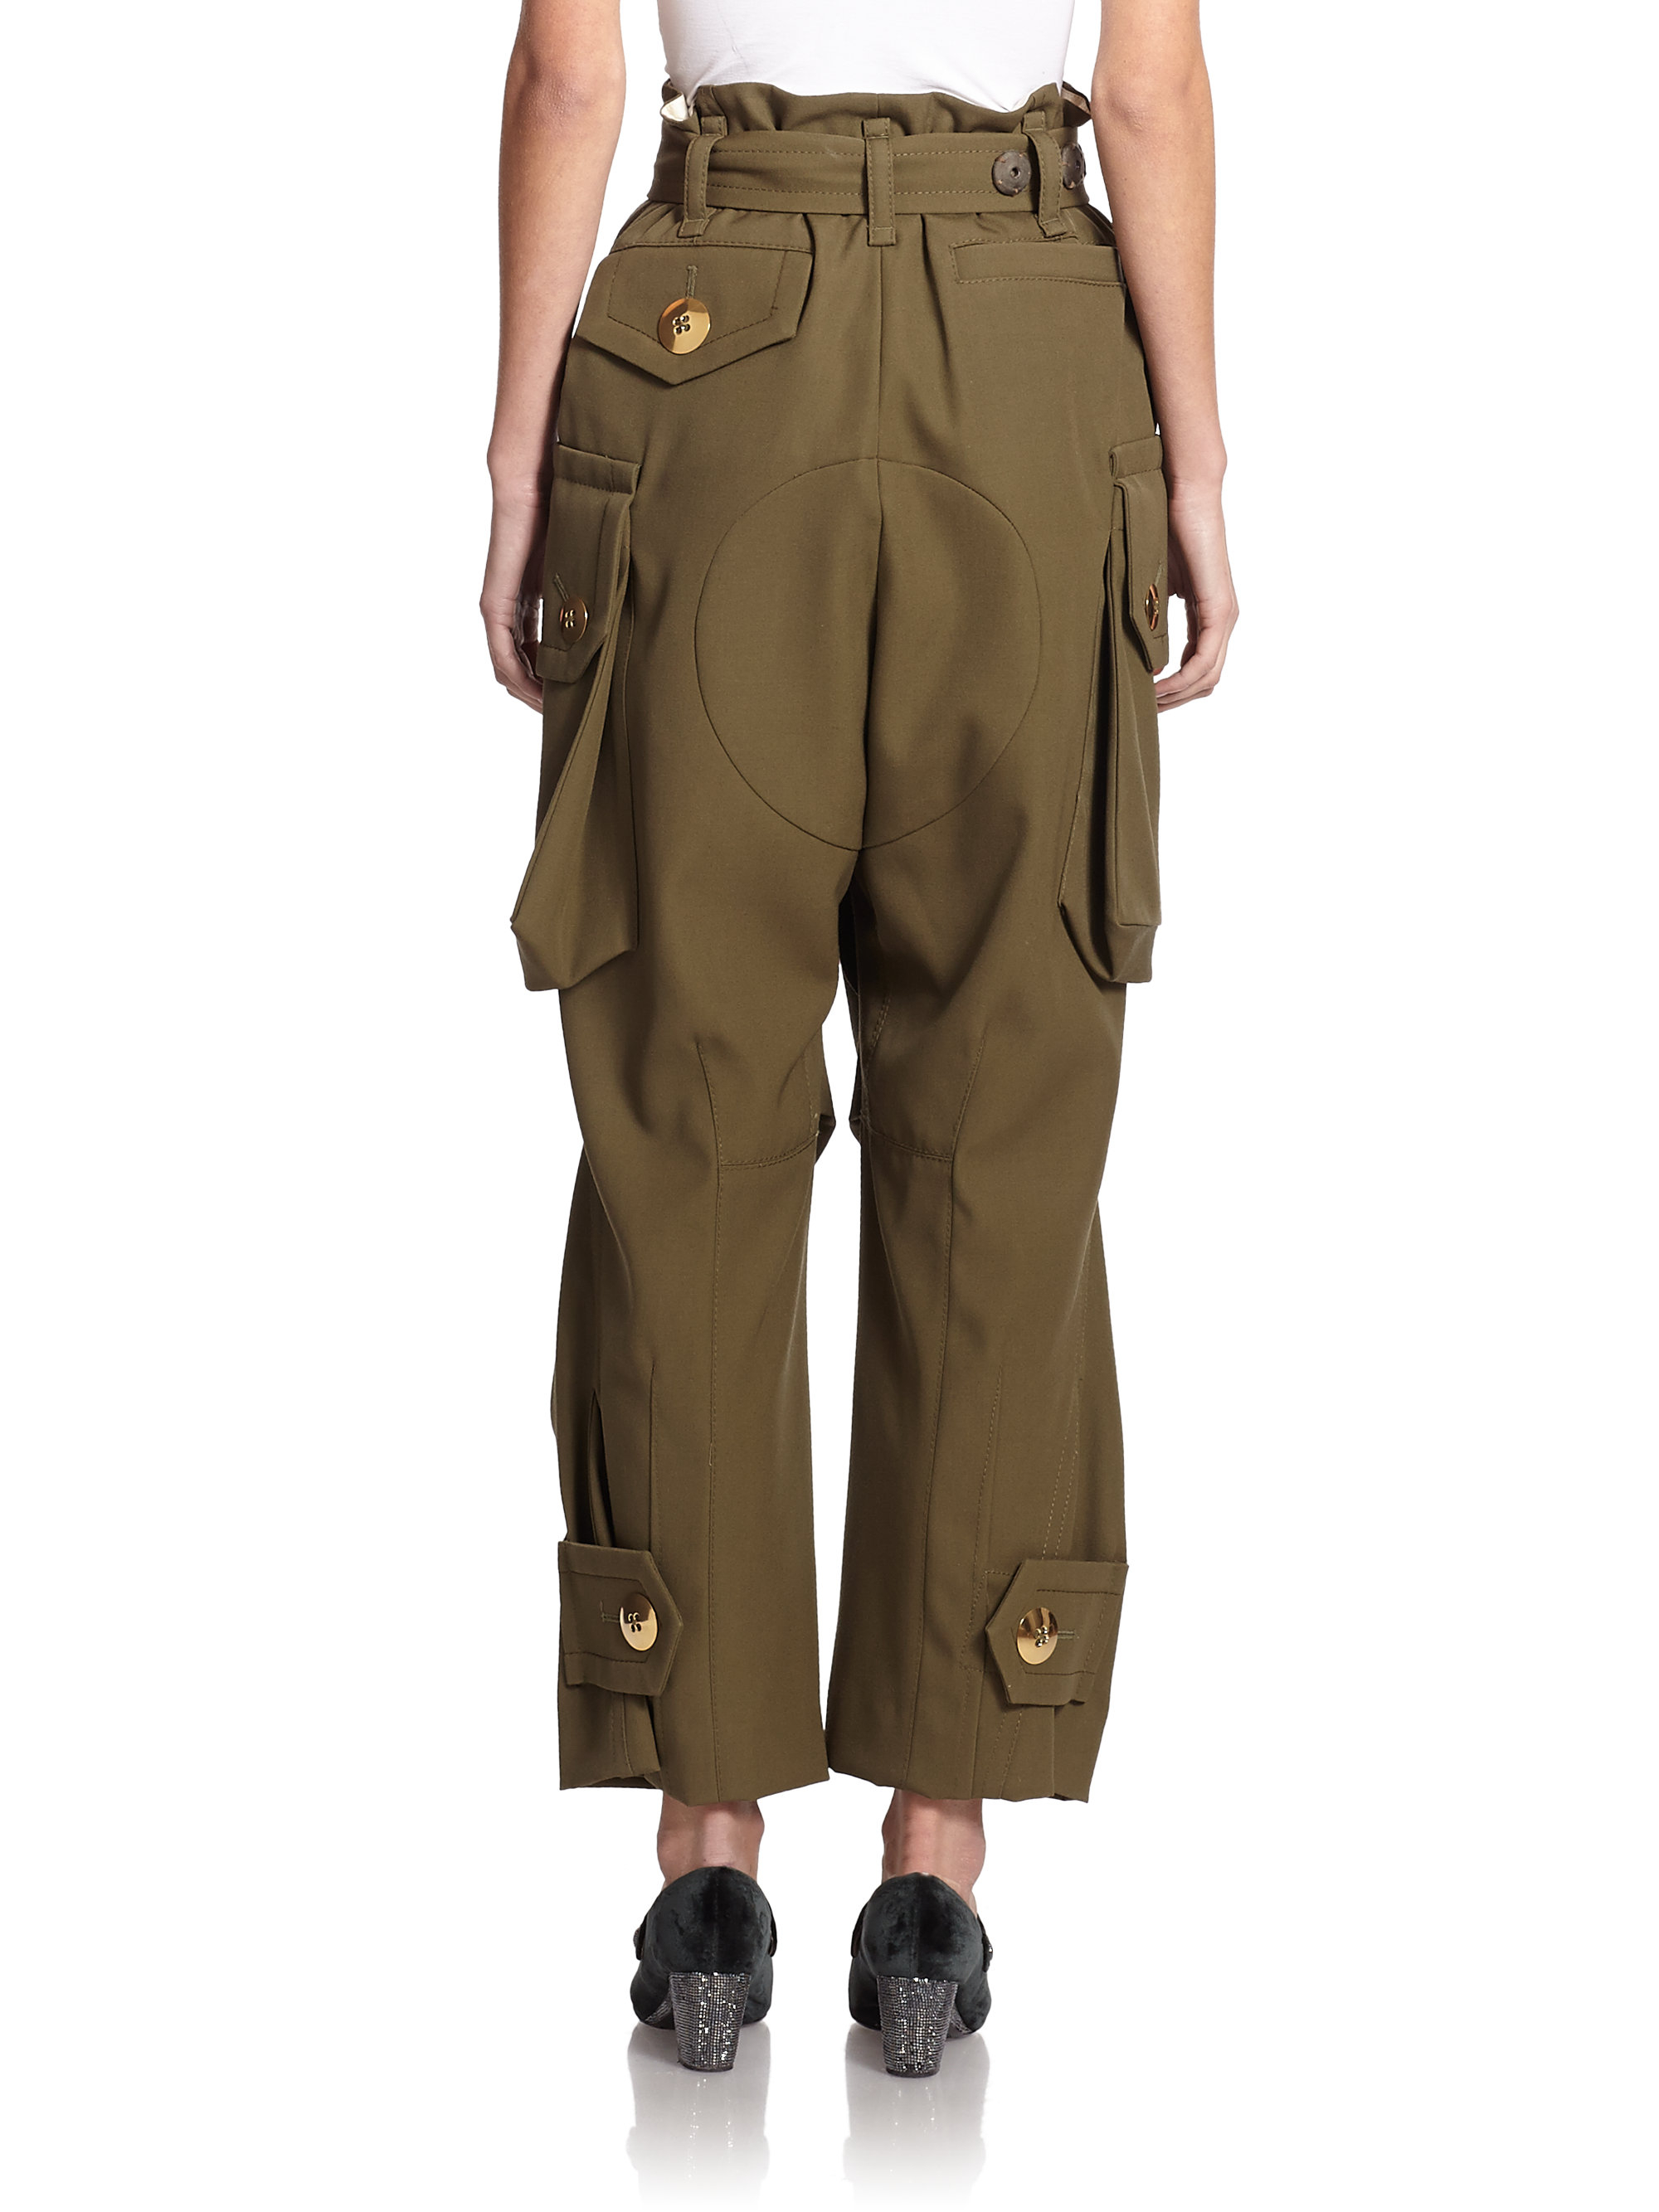 Marc jacobs Belted High-Waist Cargo Pants in Green | Lyst